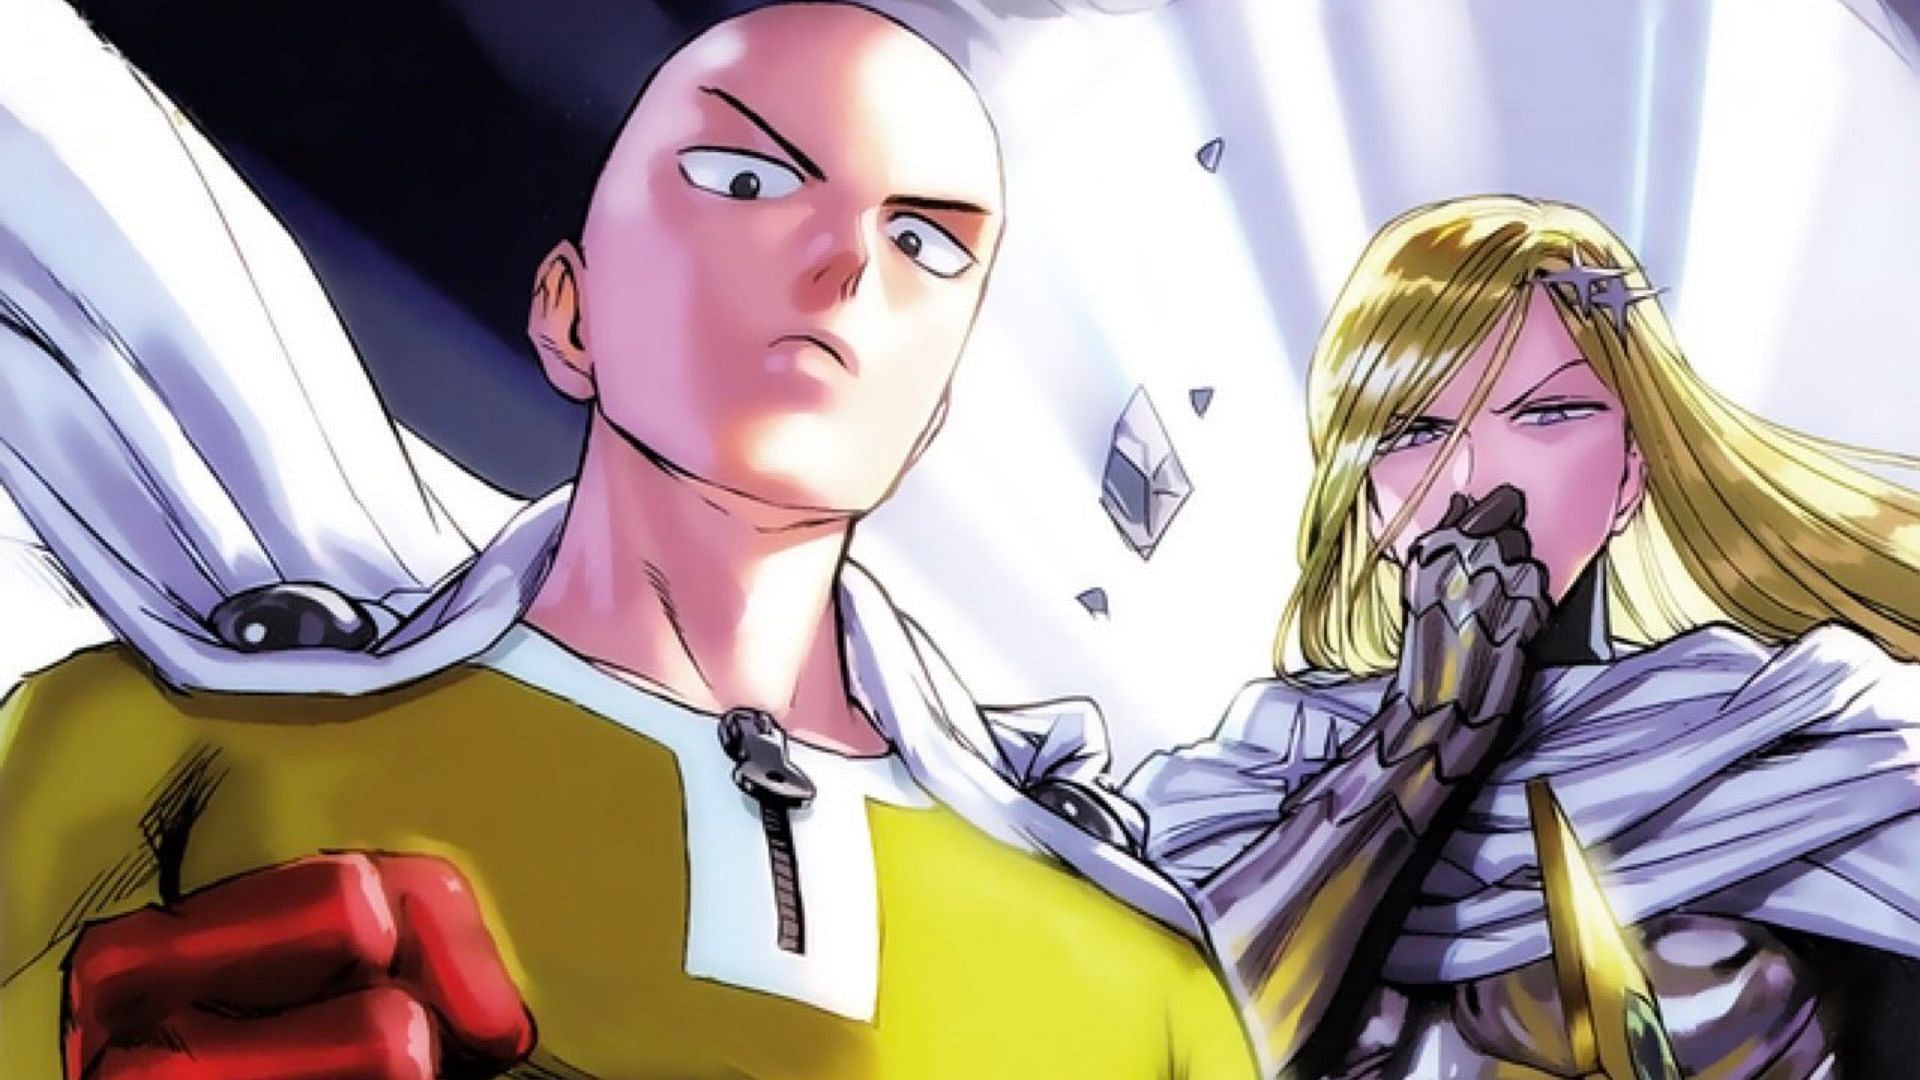 One Punch Man chapter 196: Expected release date, what to expect, and more